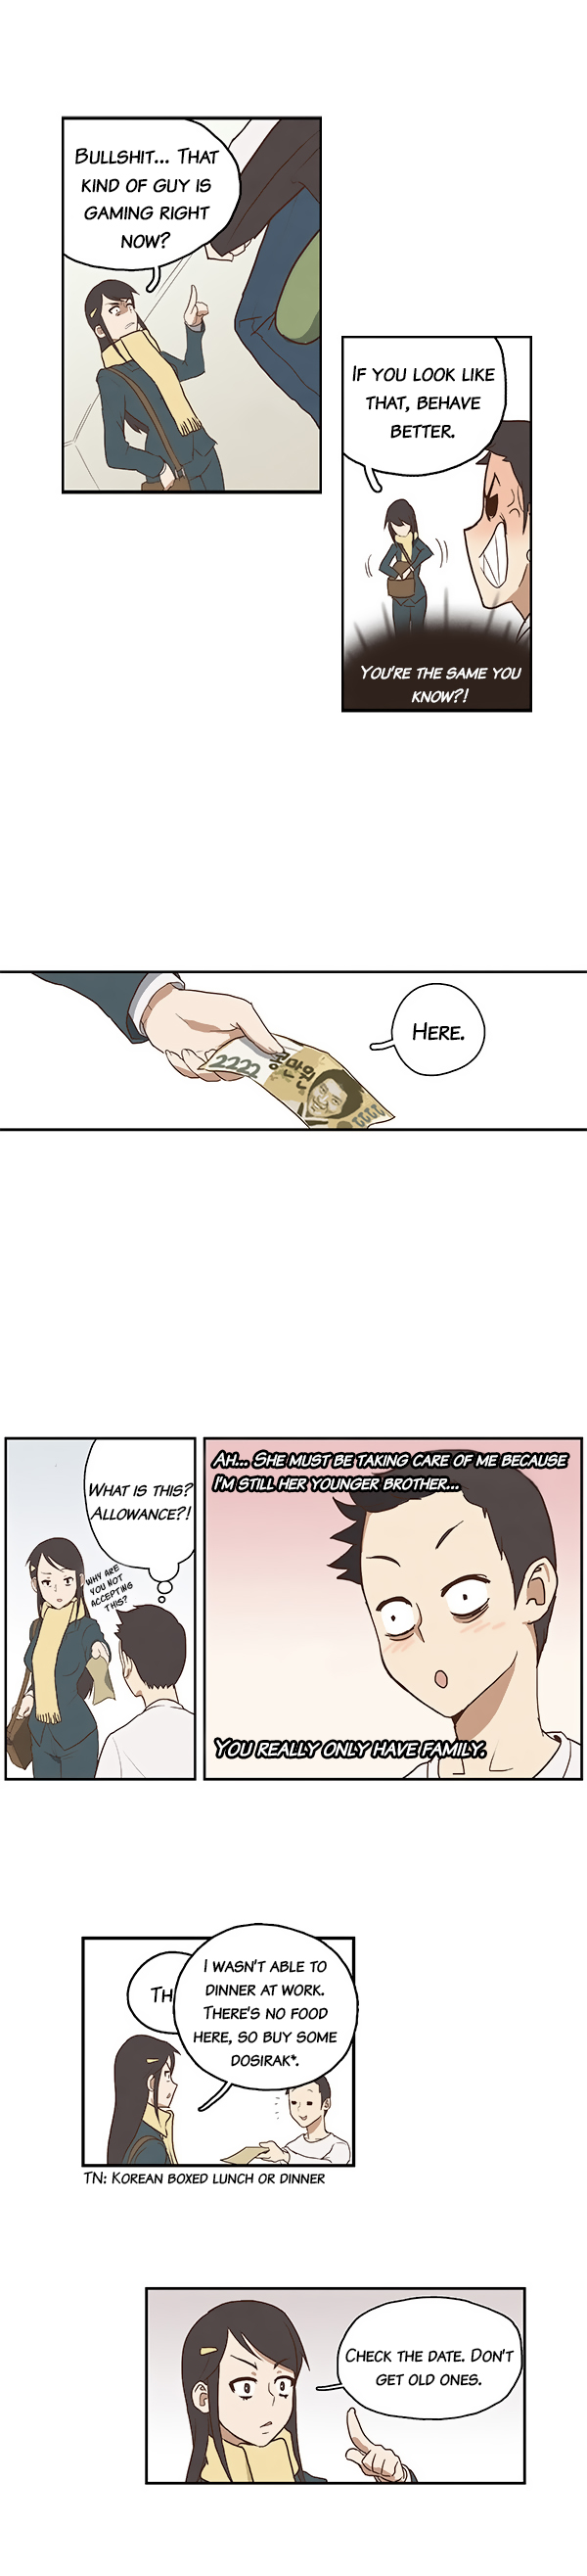 How to Open a Triangular Riceball - Chapter 1 Page 6